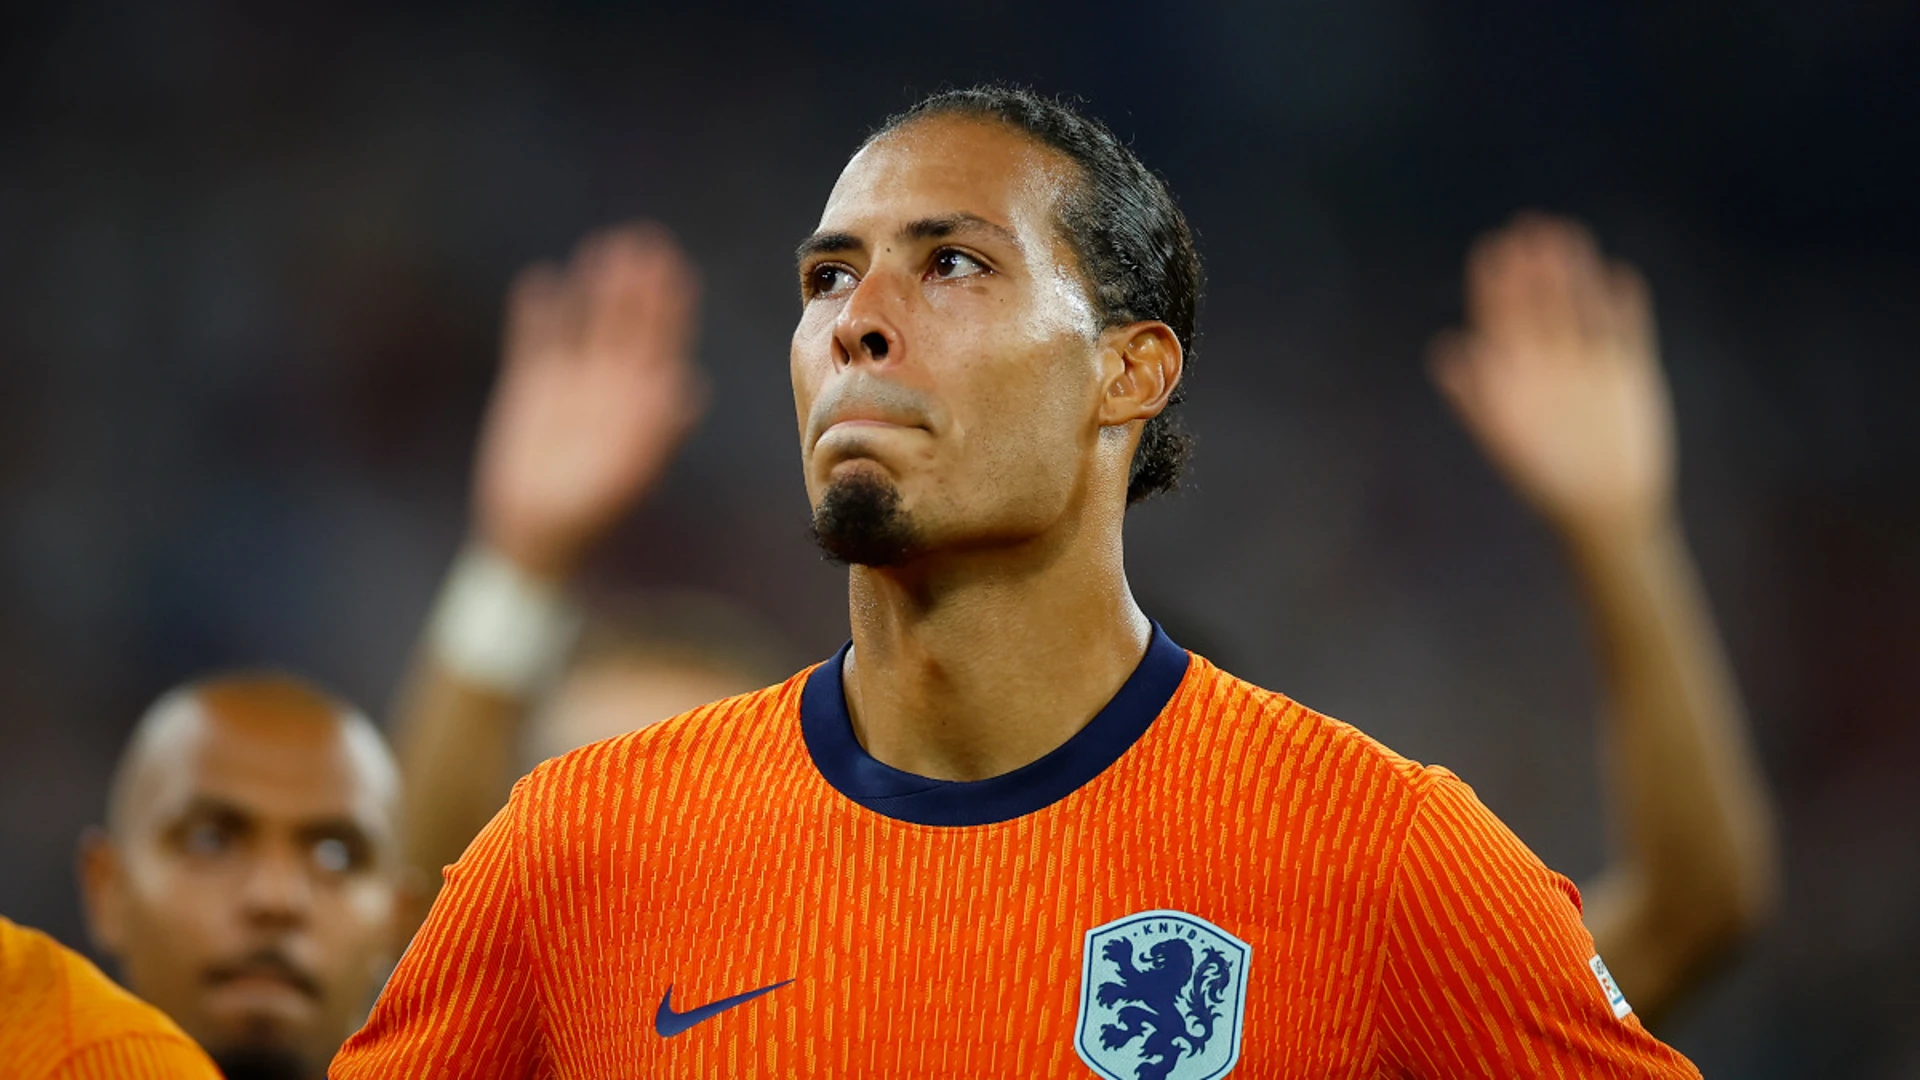 Van Dijk to consider future for club and country after Dutch defeat